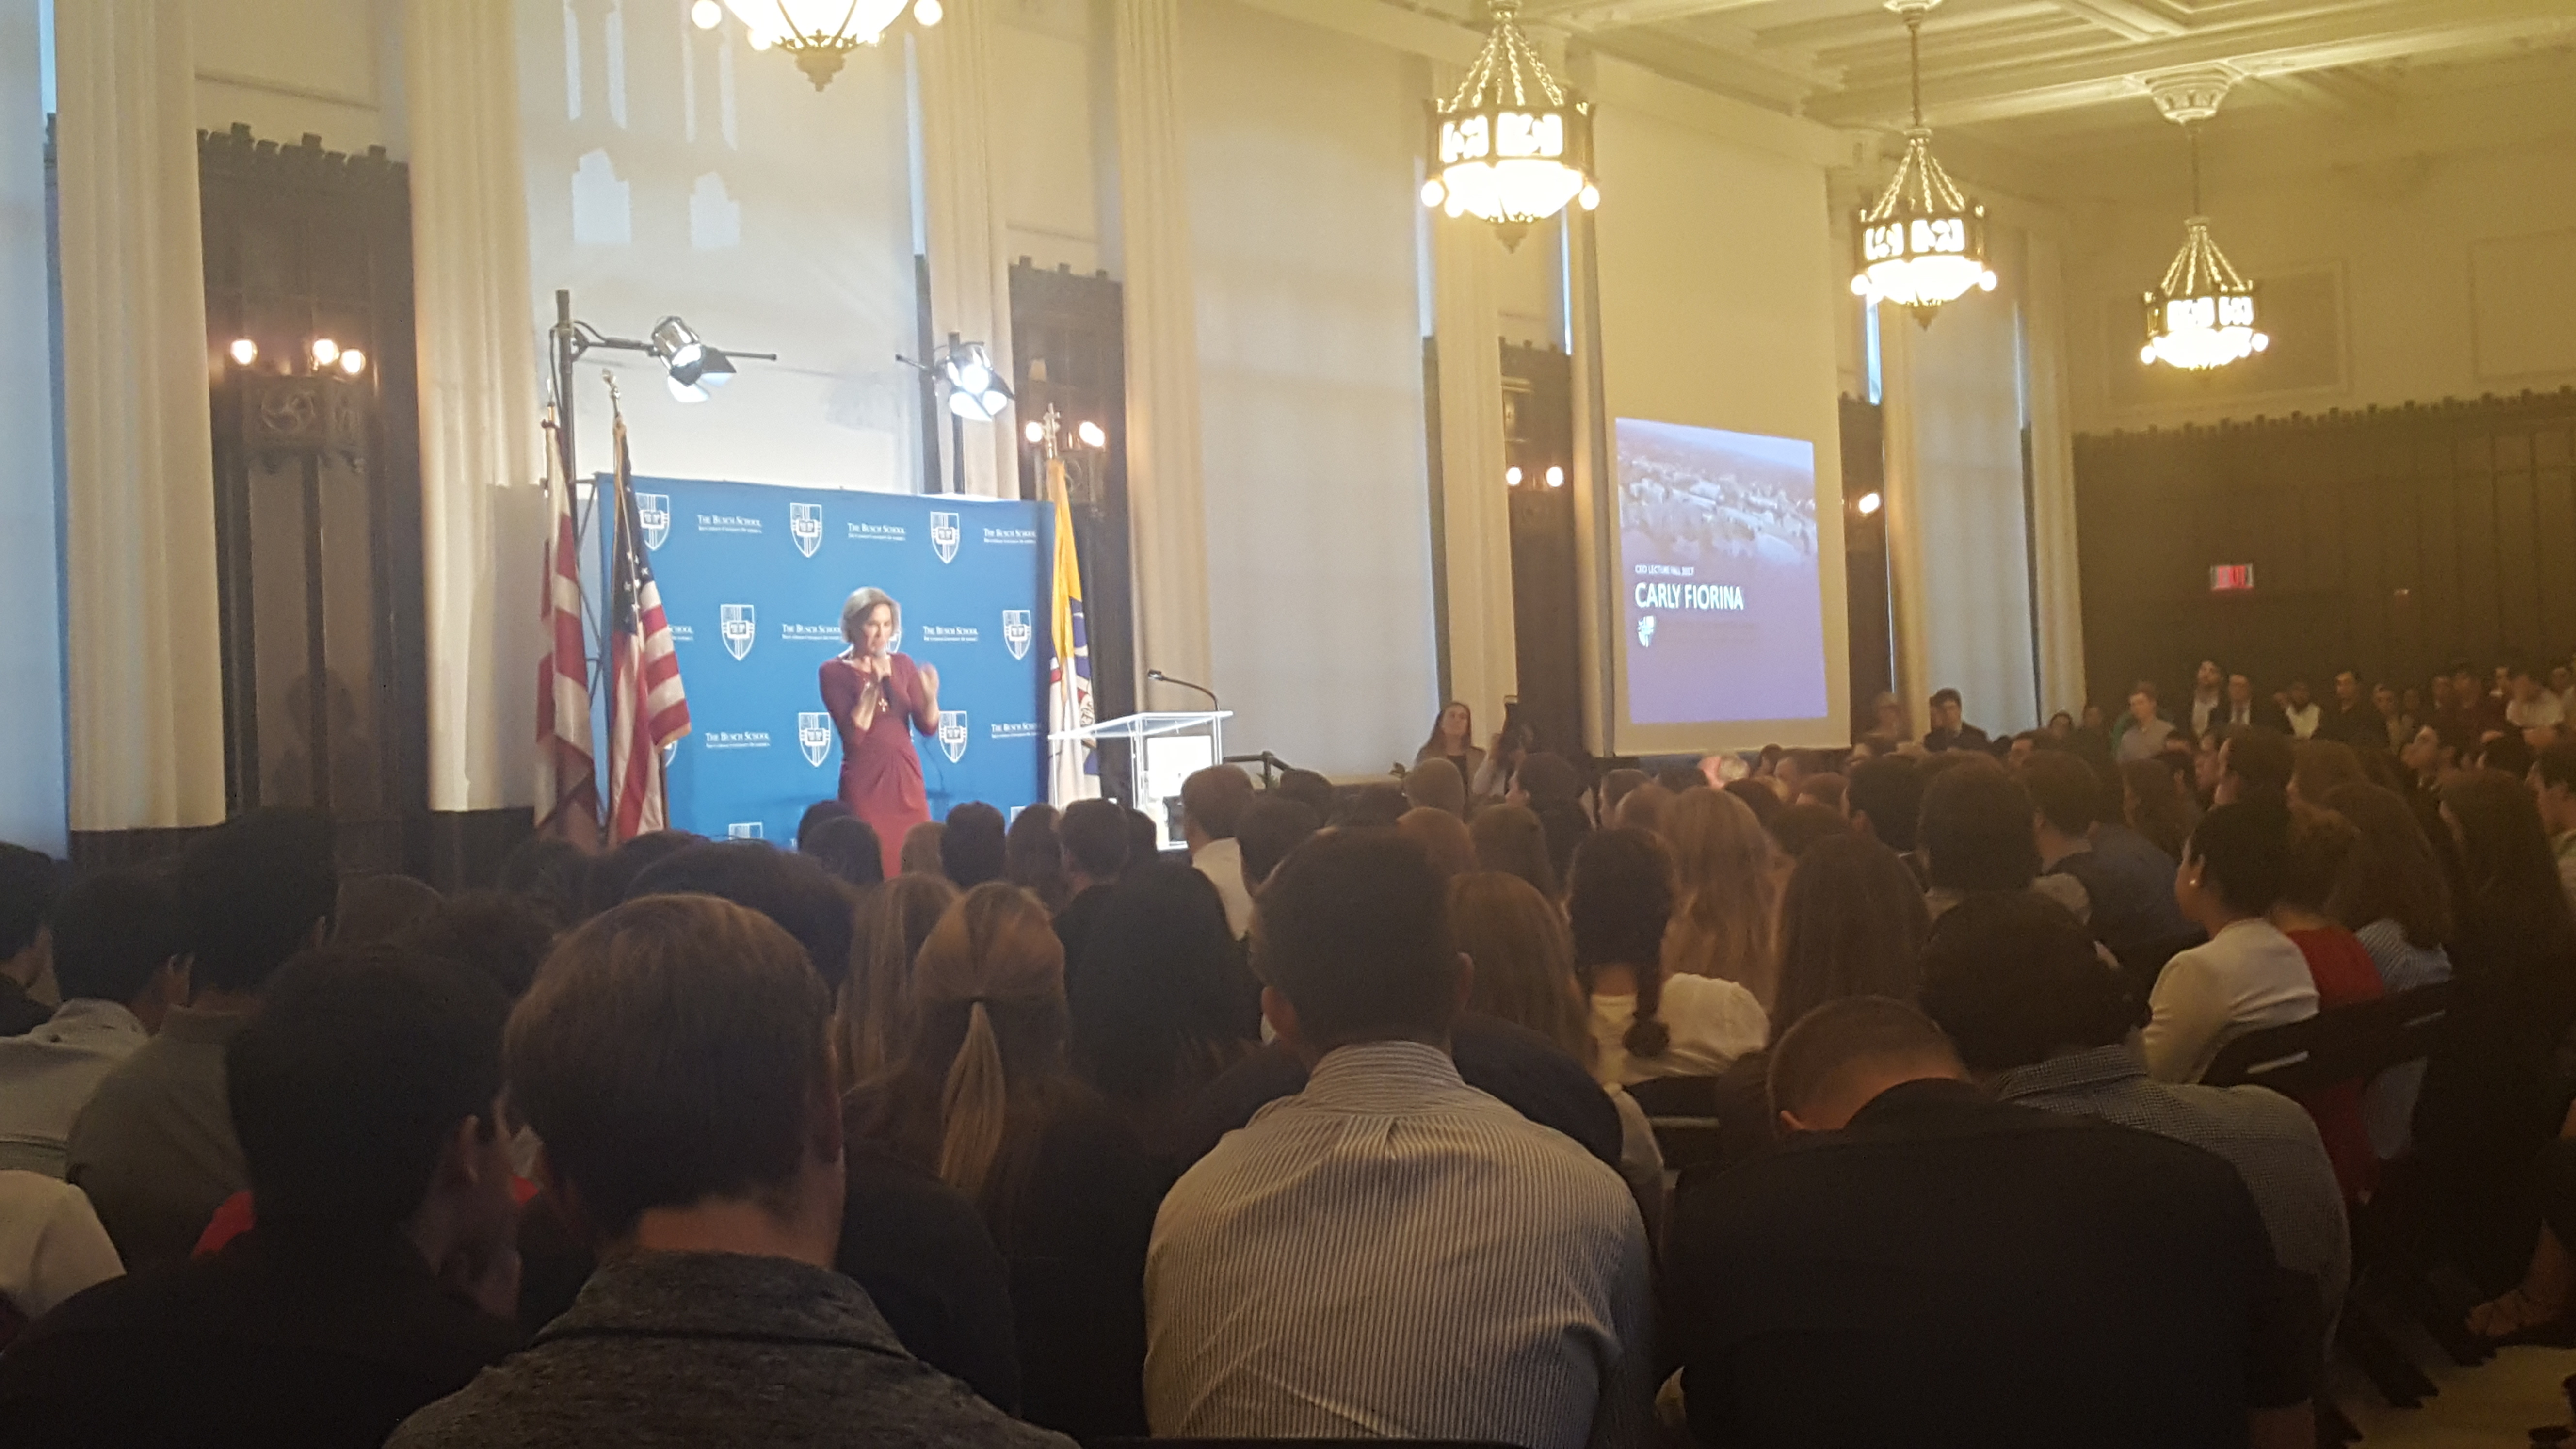 Former Presidential Candidate Carly Fiorina Speaks at Heritage Hall